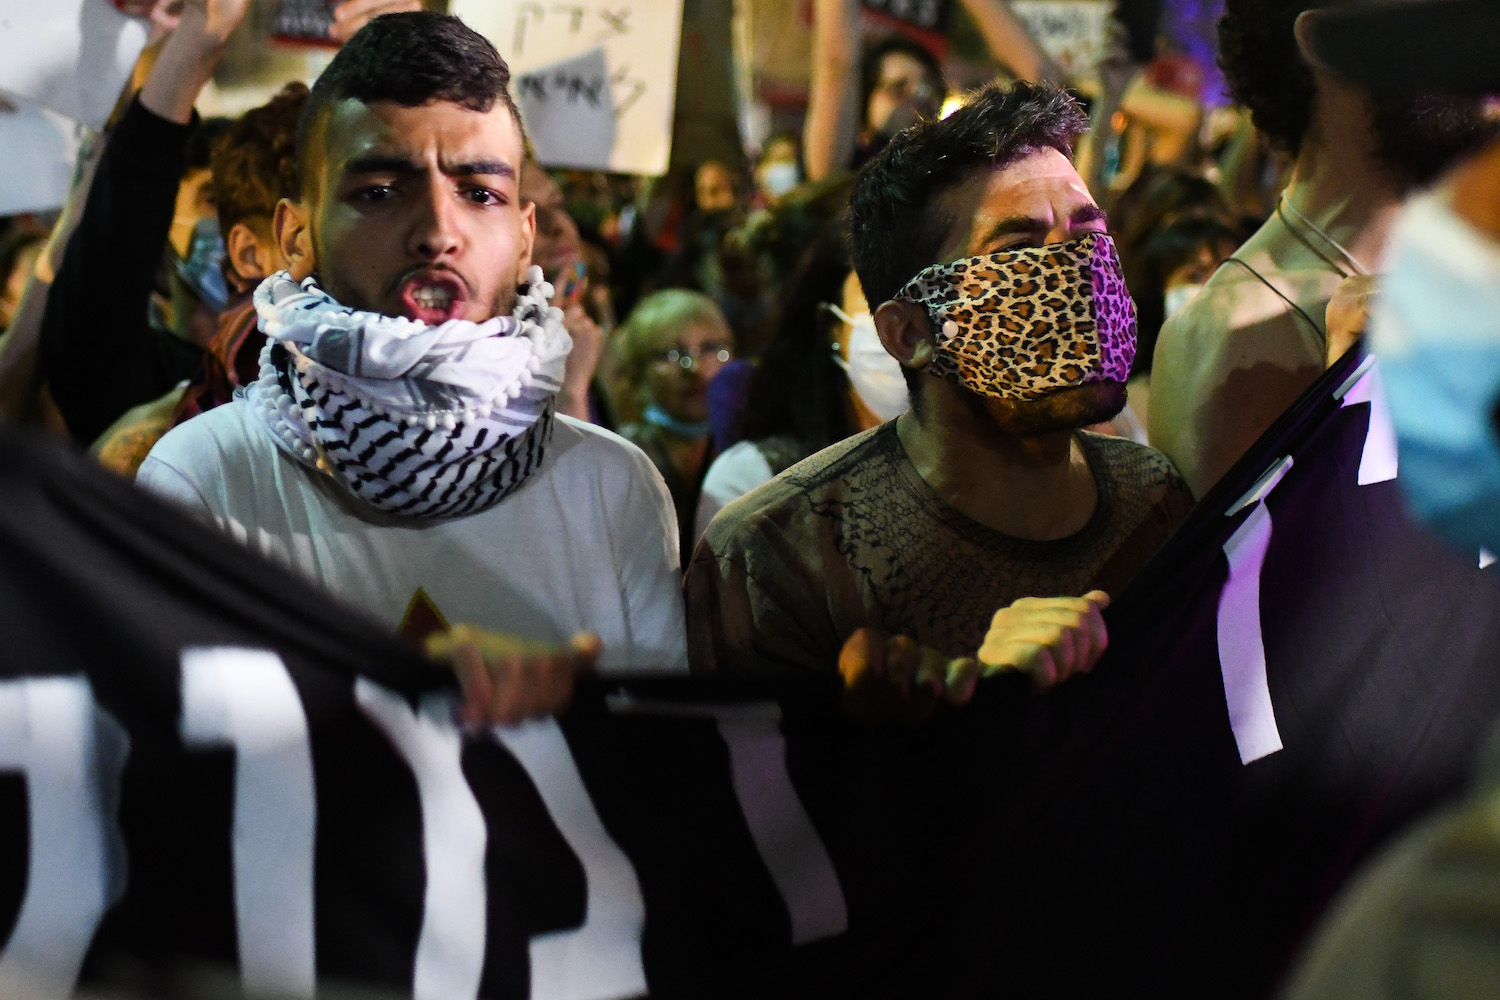 Thousands attend a protest against Israel's plan to annex parts of the West Bank, Rabin Square, Tel Aviv, June 6, 2020. (Avshalom Sassoni/Flash90)